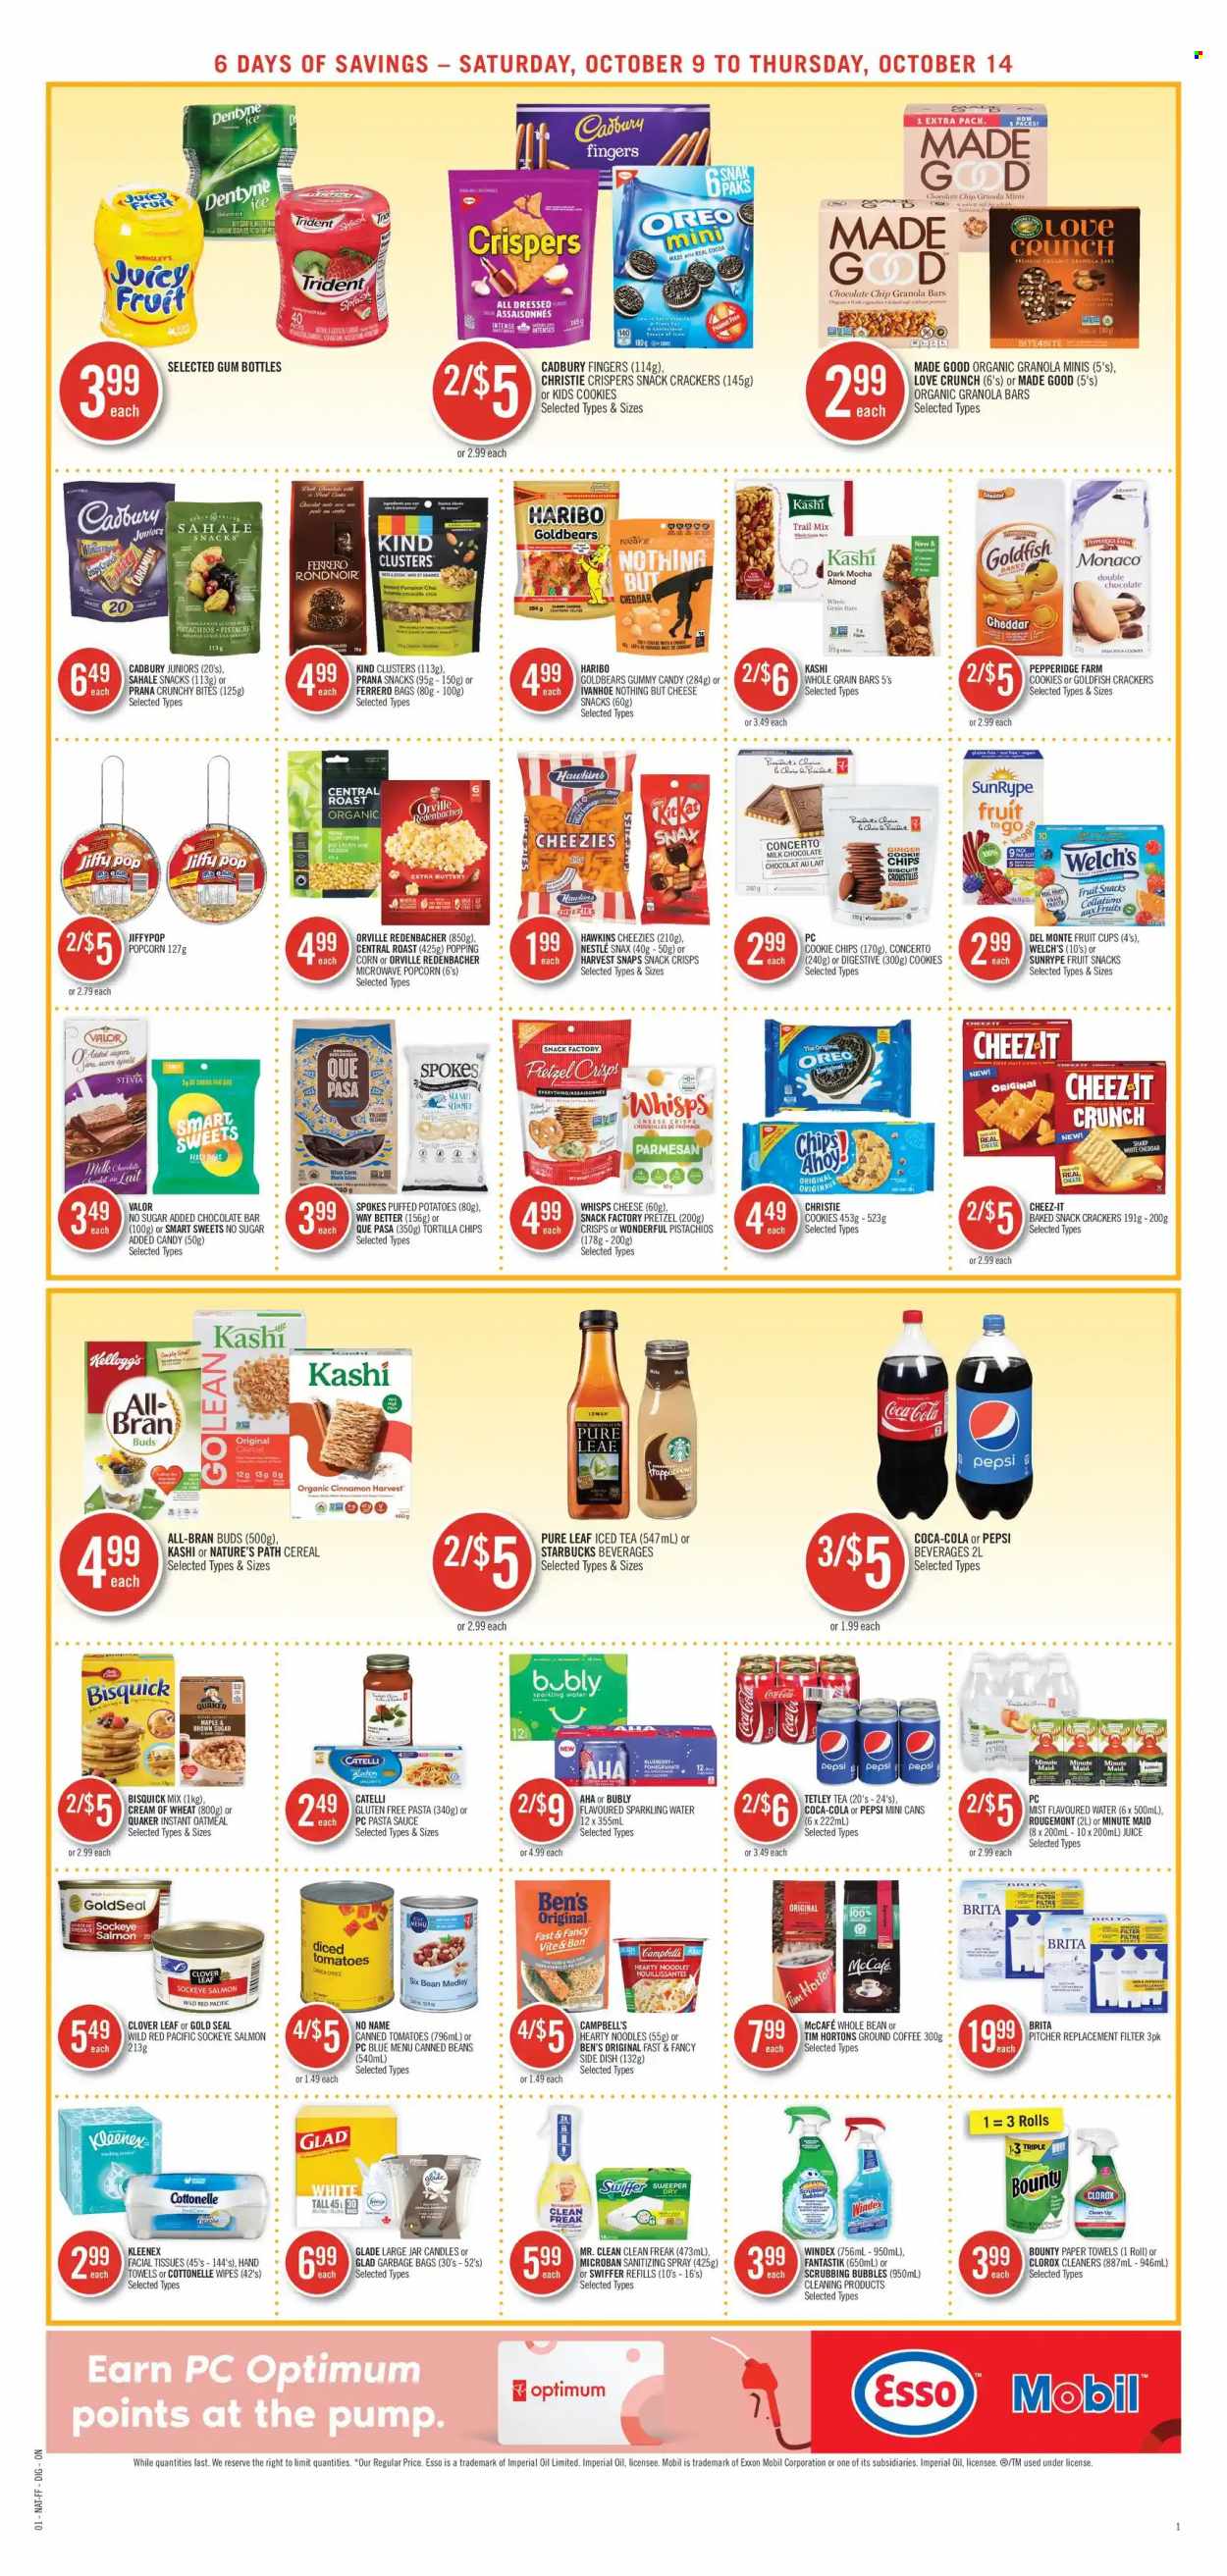 thumbnail - Shoppers Drug Mart Flyer - October 09, 2021 - October 14, 2021 - Sales products - cookies, milk chocolate, pretzels, Haribo, Bounty, crackers, biscuit, Cadbury, Digestive, Trident, Welch's, fruit snack, chocolate bar, tortilla chips, popcorn, Goldfish, Cheez-It, Bisquick, oatmeal, Harvest Snaps, corn, salmon, pumpkin, pasta sauce, sauce, cereals, Cream of Wheat, granola bar, Quaker, All-Bran, noodles, ginger, cinnamon, Campbell's, pistachios, trail mix, Coca-Cola, Pepsi, juice, ice tea, Clover, fruit punch, Pure Leaf, coffee, ground coffee, Starbucks, McCafe, wipes, Cottonelle, Kleenex, tissues, kitchen towels, paper towels, Windex, Scrubbing Bubbles, Clorox, Swiffer, facial tissues, Nestlé, Oreo, chips, Ferrero Rocher. Page 9.